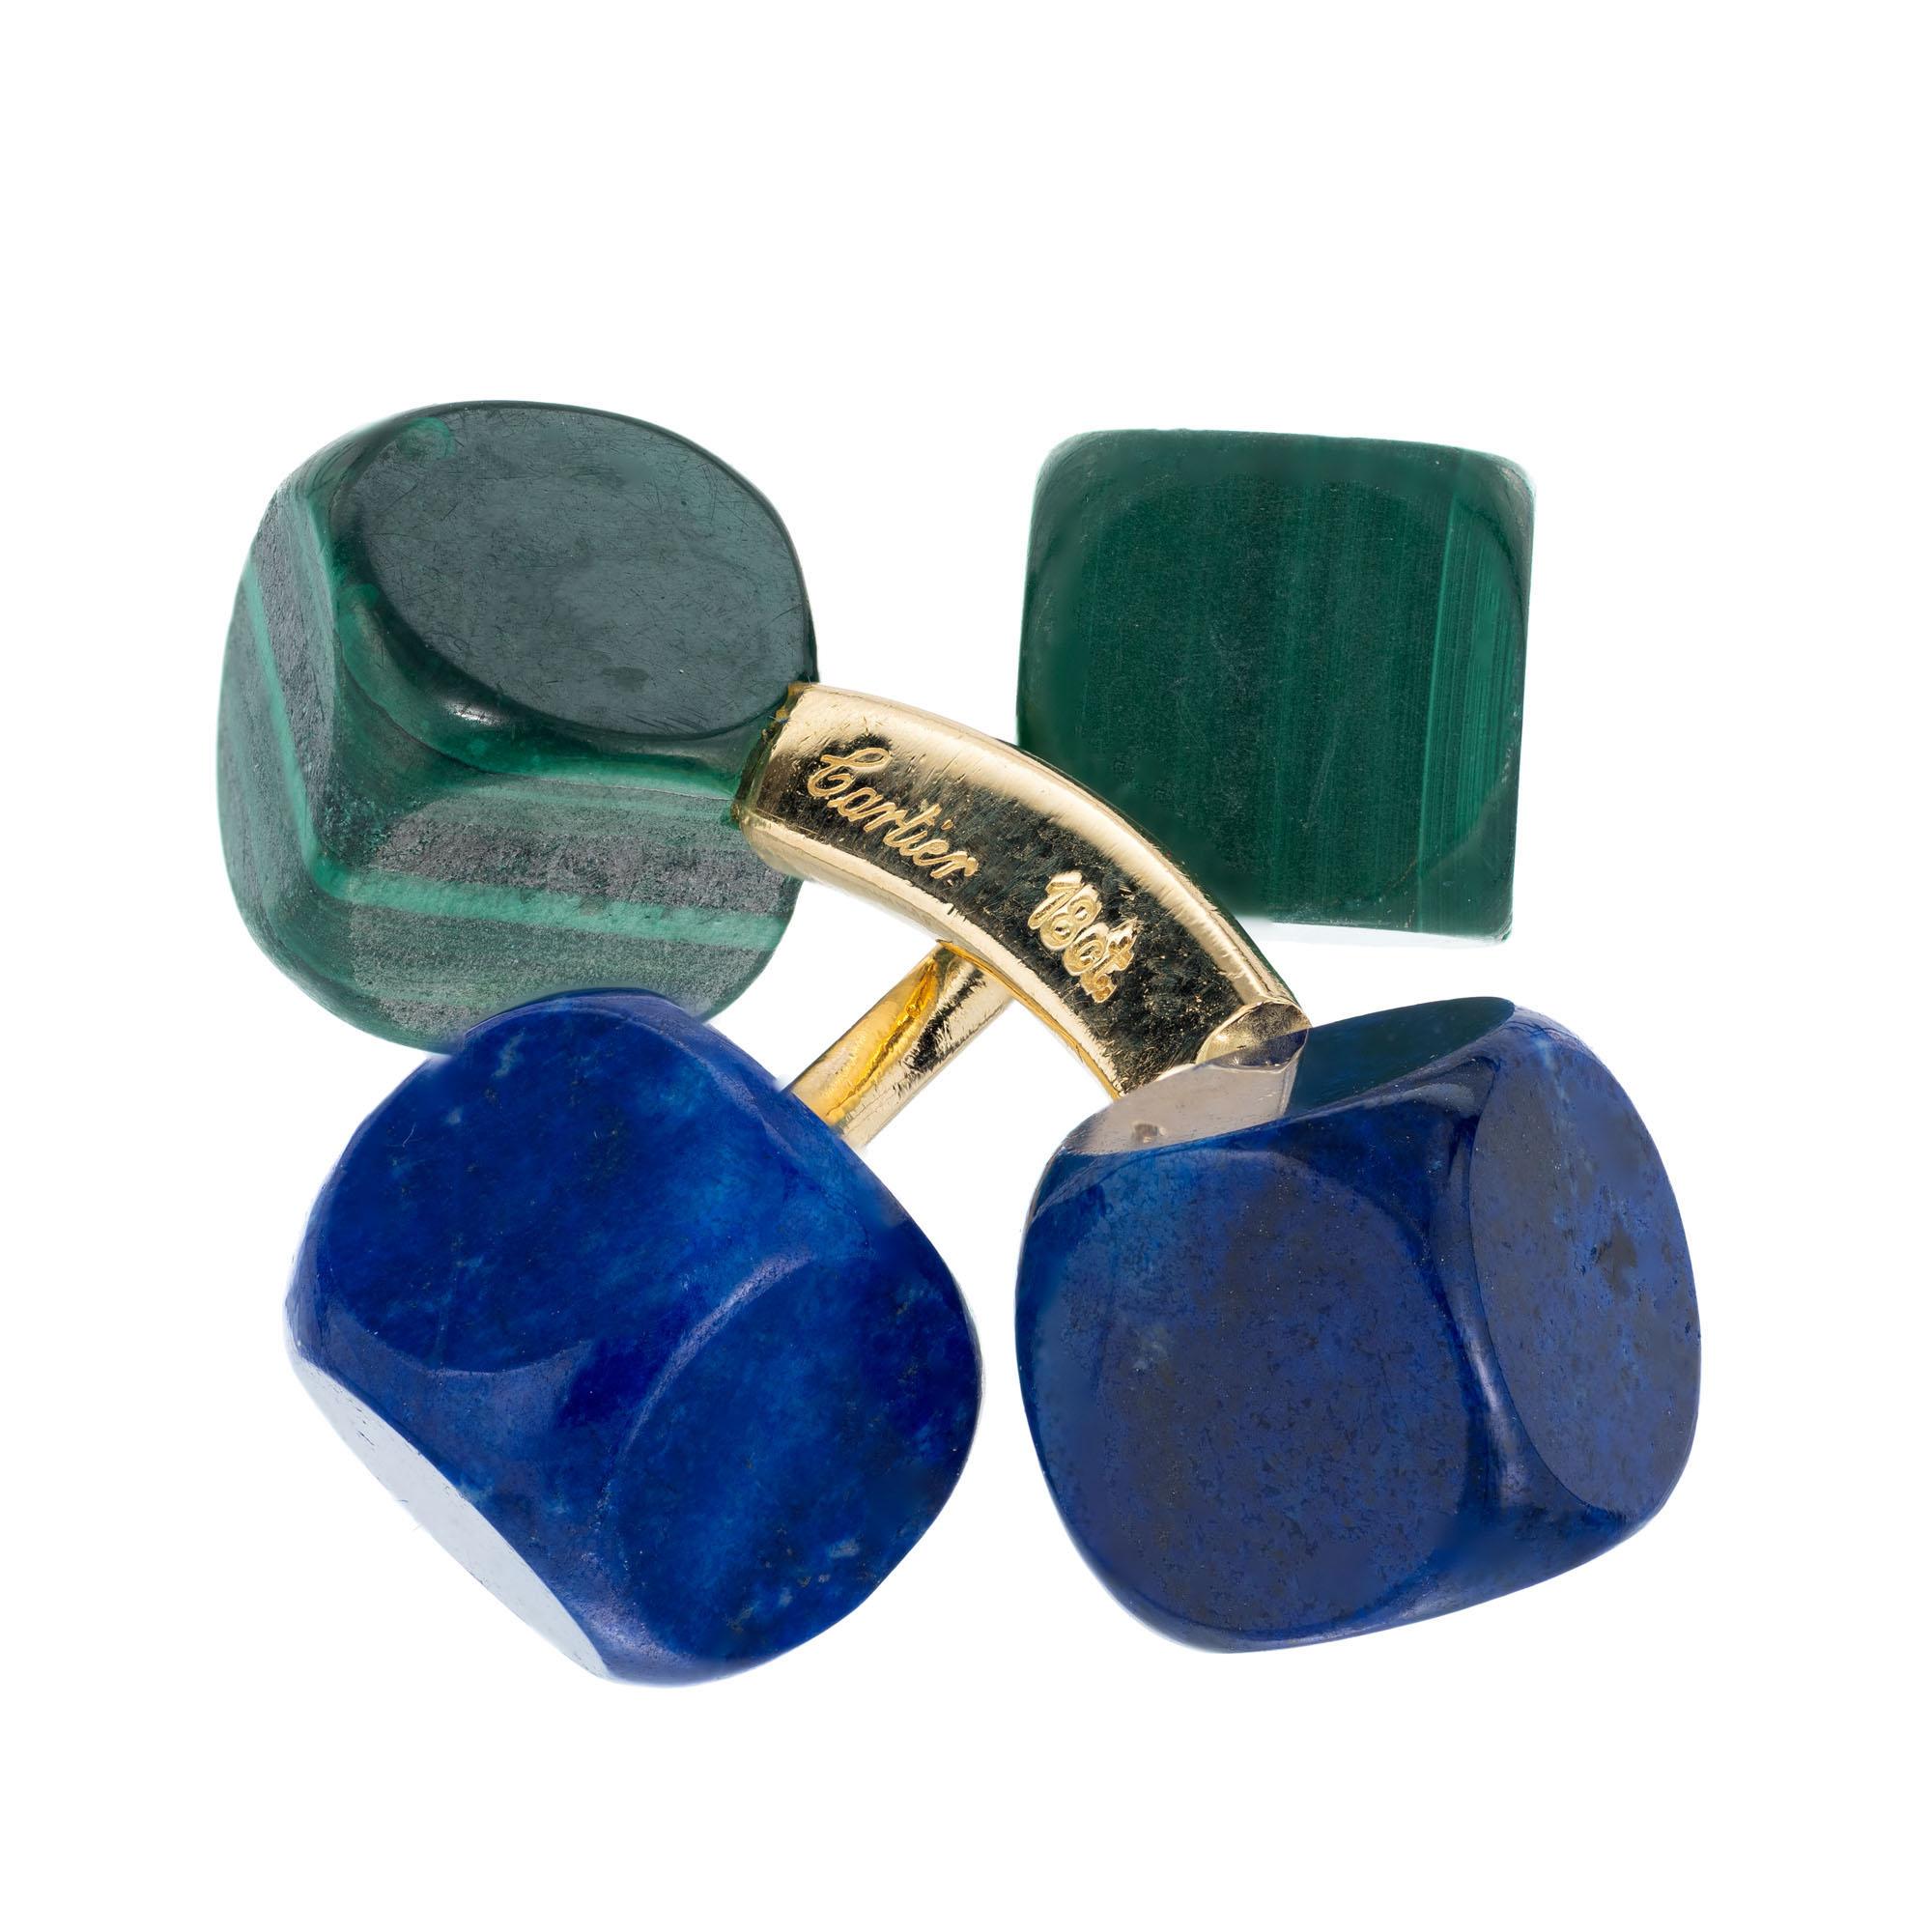 Cartier 1960’s natural double-sided cufflinks with lapis and malachite in 18k yellow gold. Made in Germany

2 lapis cubes 8mm
2 malachite cubes 8mm
18k yellow gold 
Stamped: 18k
Hallmark: Cartier Germany
Top to bottom: 11.2mm or .5 Inches
Width: